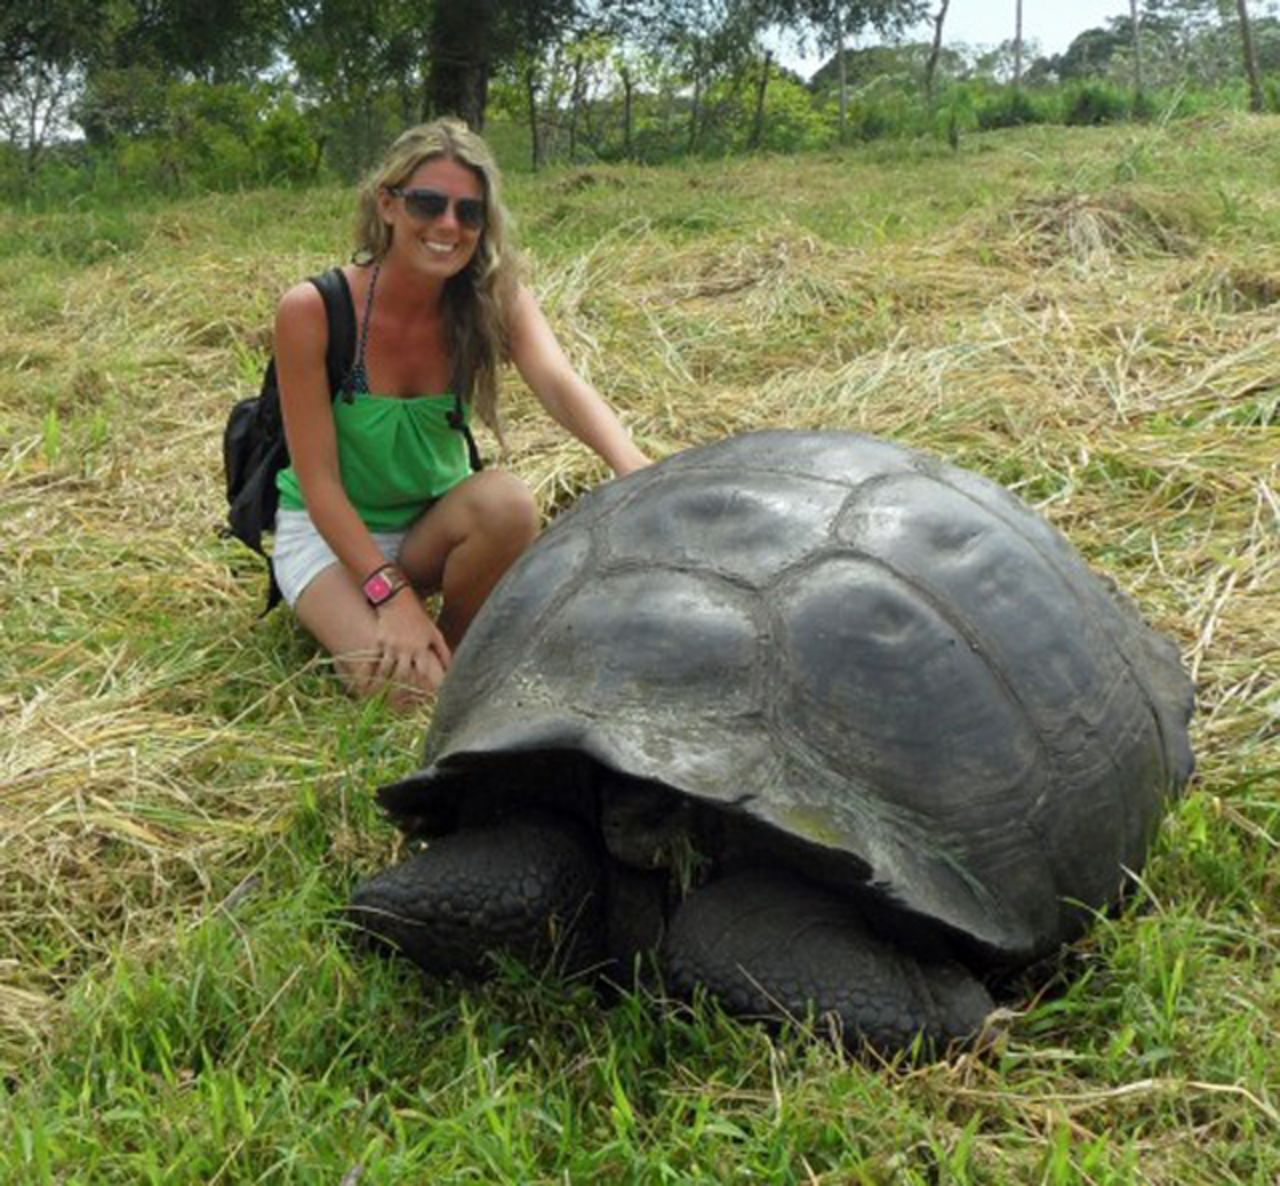 Christina Taylor of Del Mar, California, poses with a giant Galapagos tortoise. She says she found great adventure and many animal sightings, as well as great food, while visiting the Galapagos Islands. "The Galapagos Islands were just as amazing as I had expected! I saw the majority of animal species I had sought out to see. ... By far, the best part of getting to see all of these species, was that none of them had any fear towards humans. Sea lions would swim right up to you, birds would land right on you, and most wouldn't even move if they were in your way."